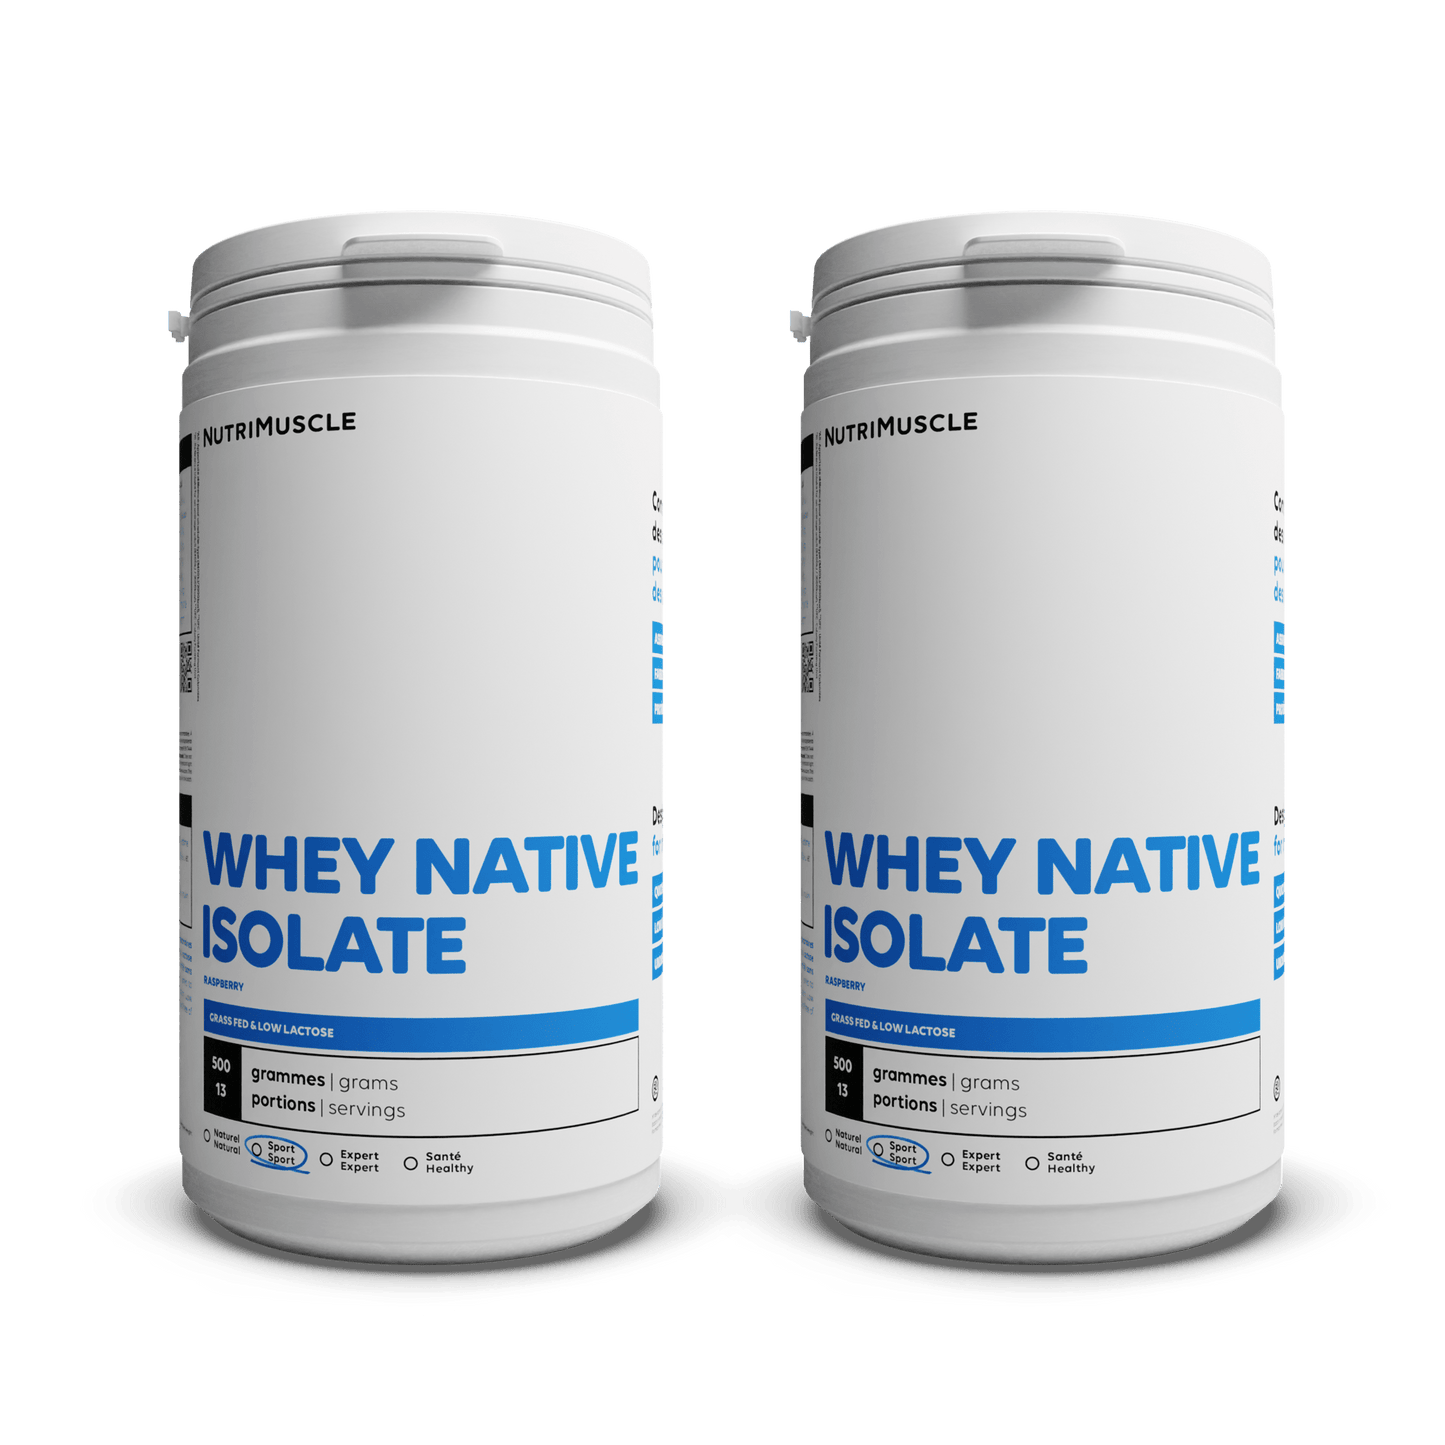 Nutrimuscle Protéines Framboise / 1.00 kg Whey Native Isolate (Low lactose)